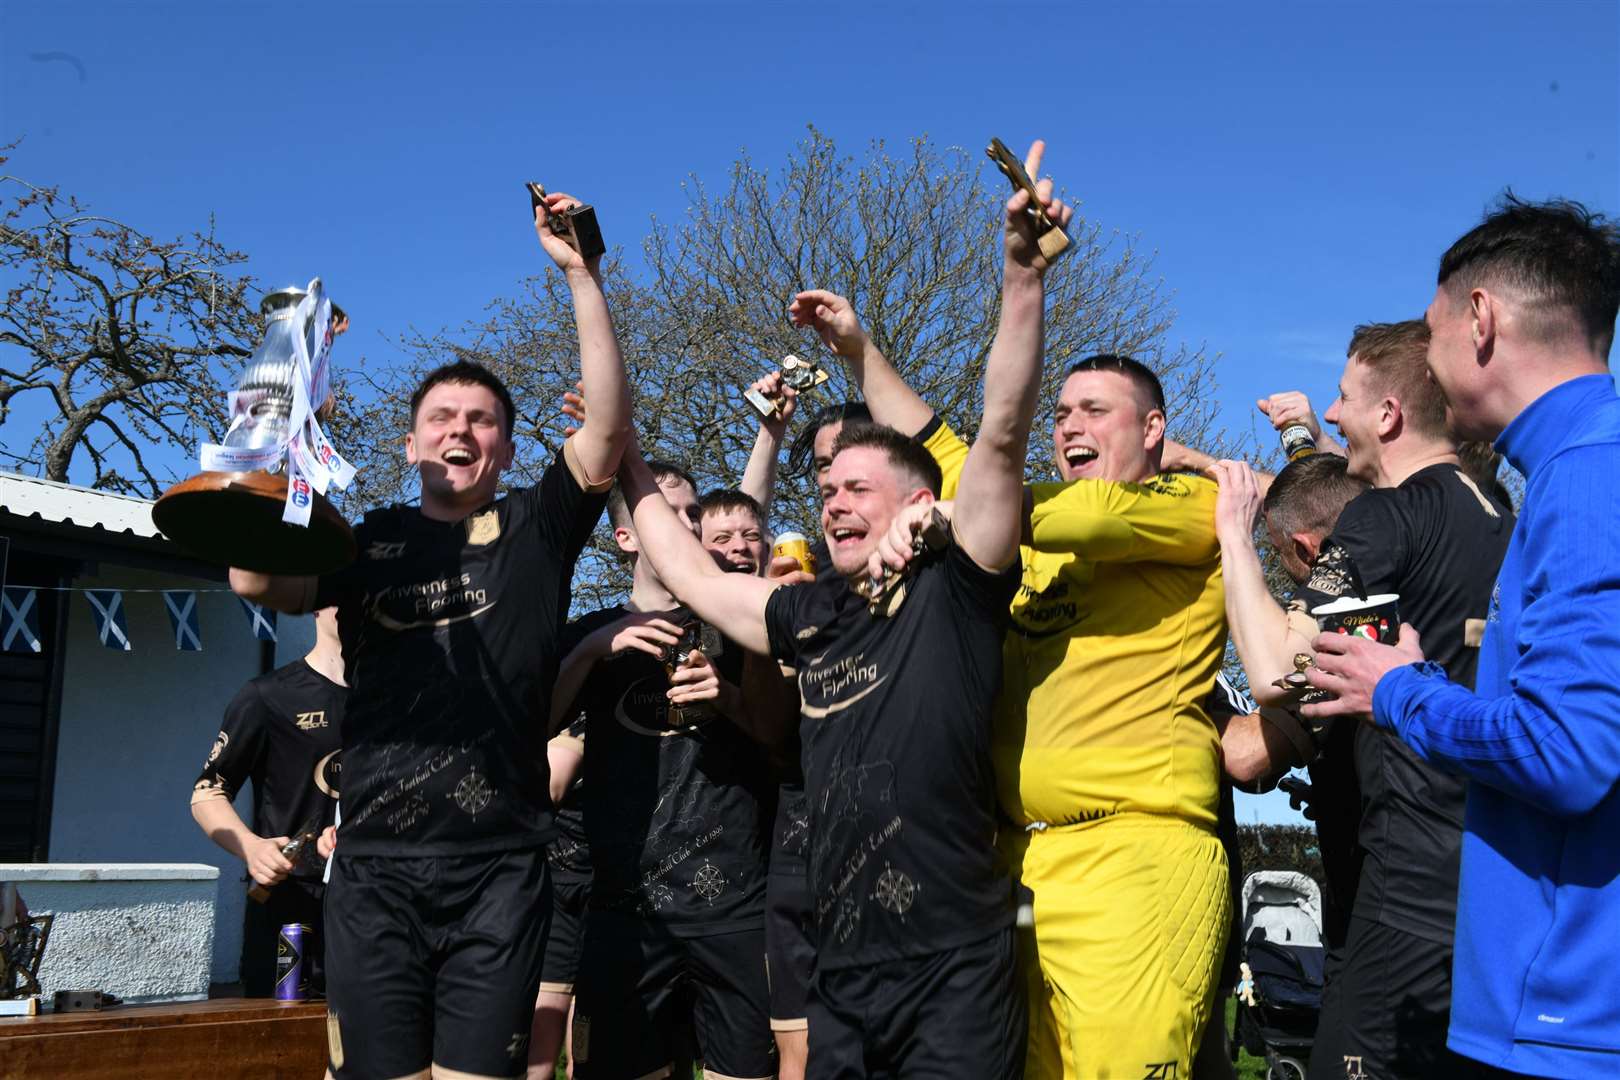 Loch Ness FC win the North Caledonian League 2023. Picture: James Mackenzie.